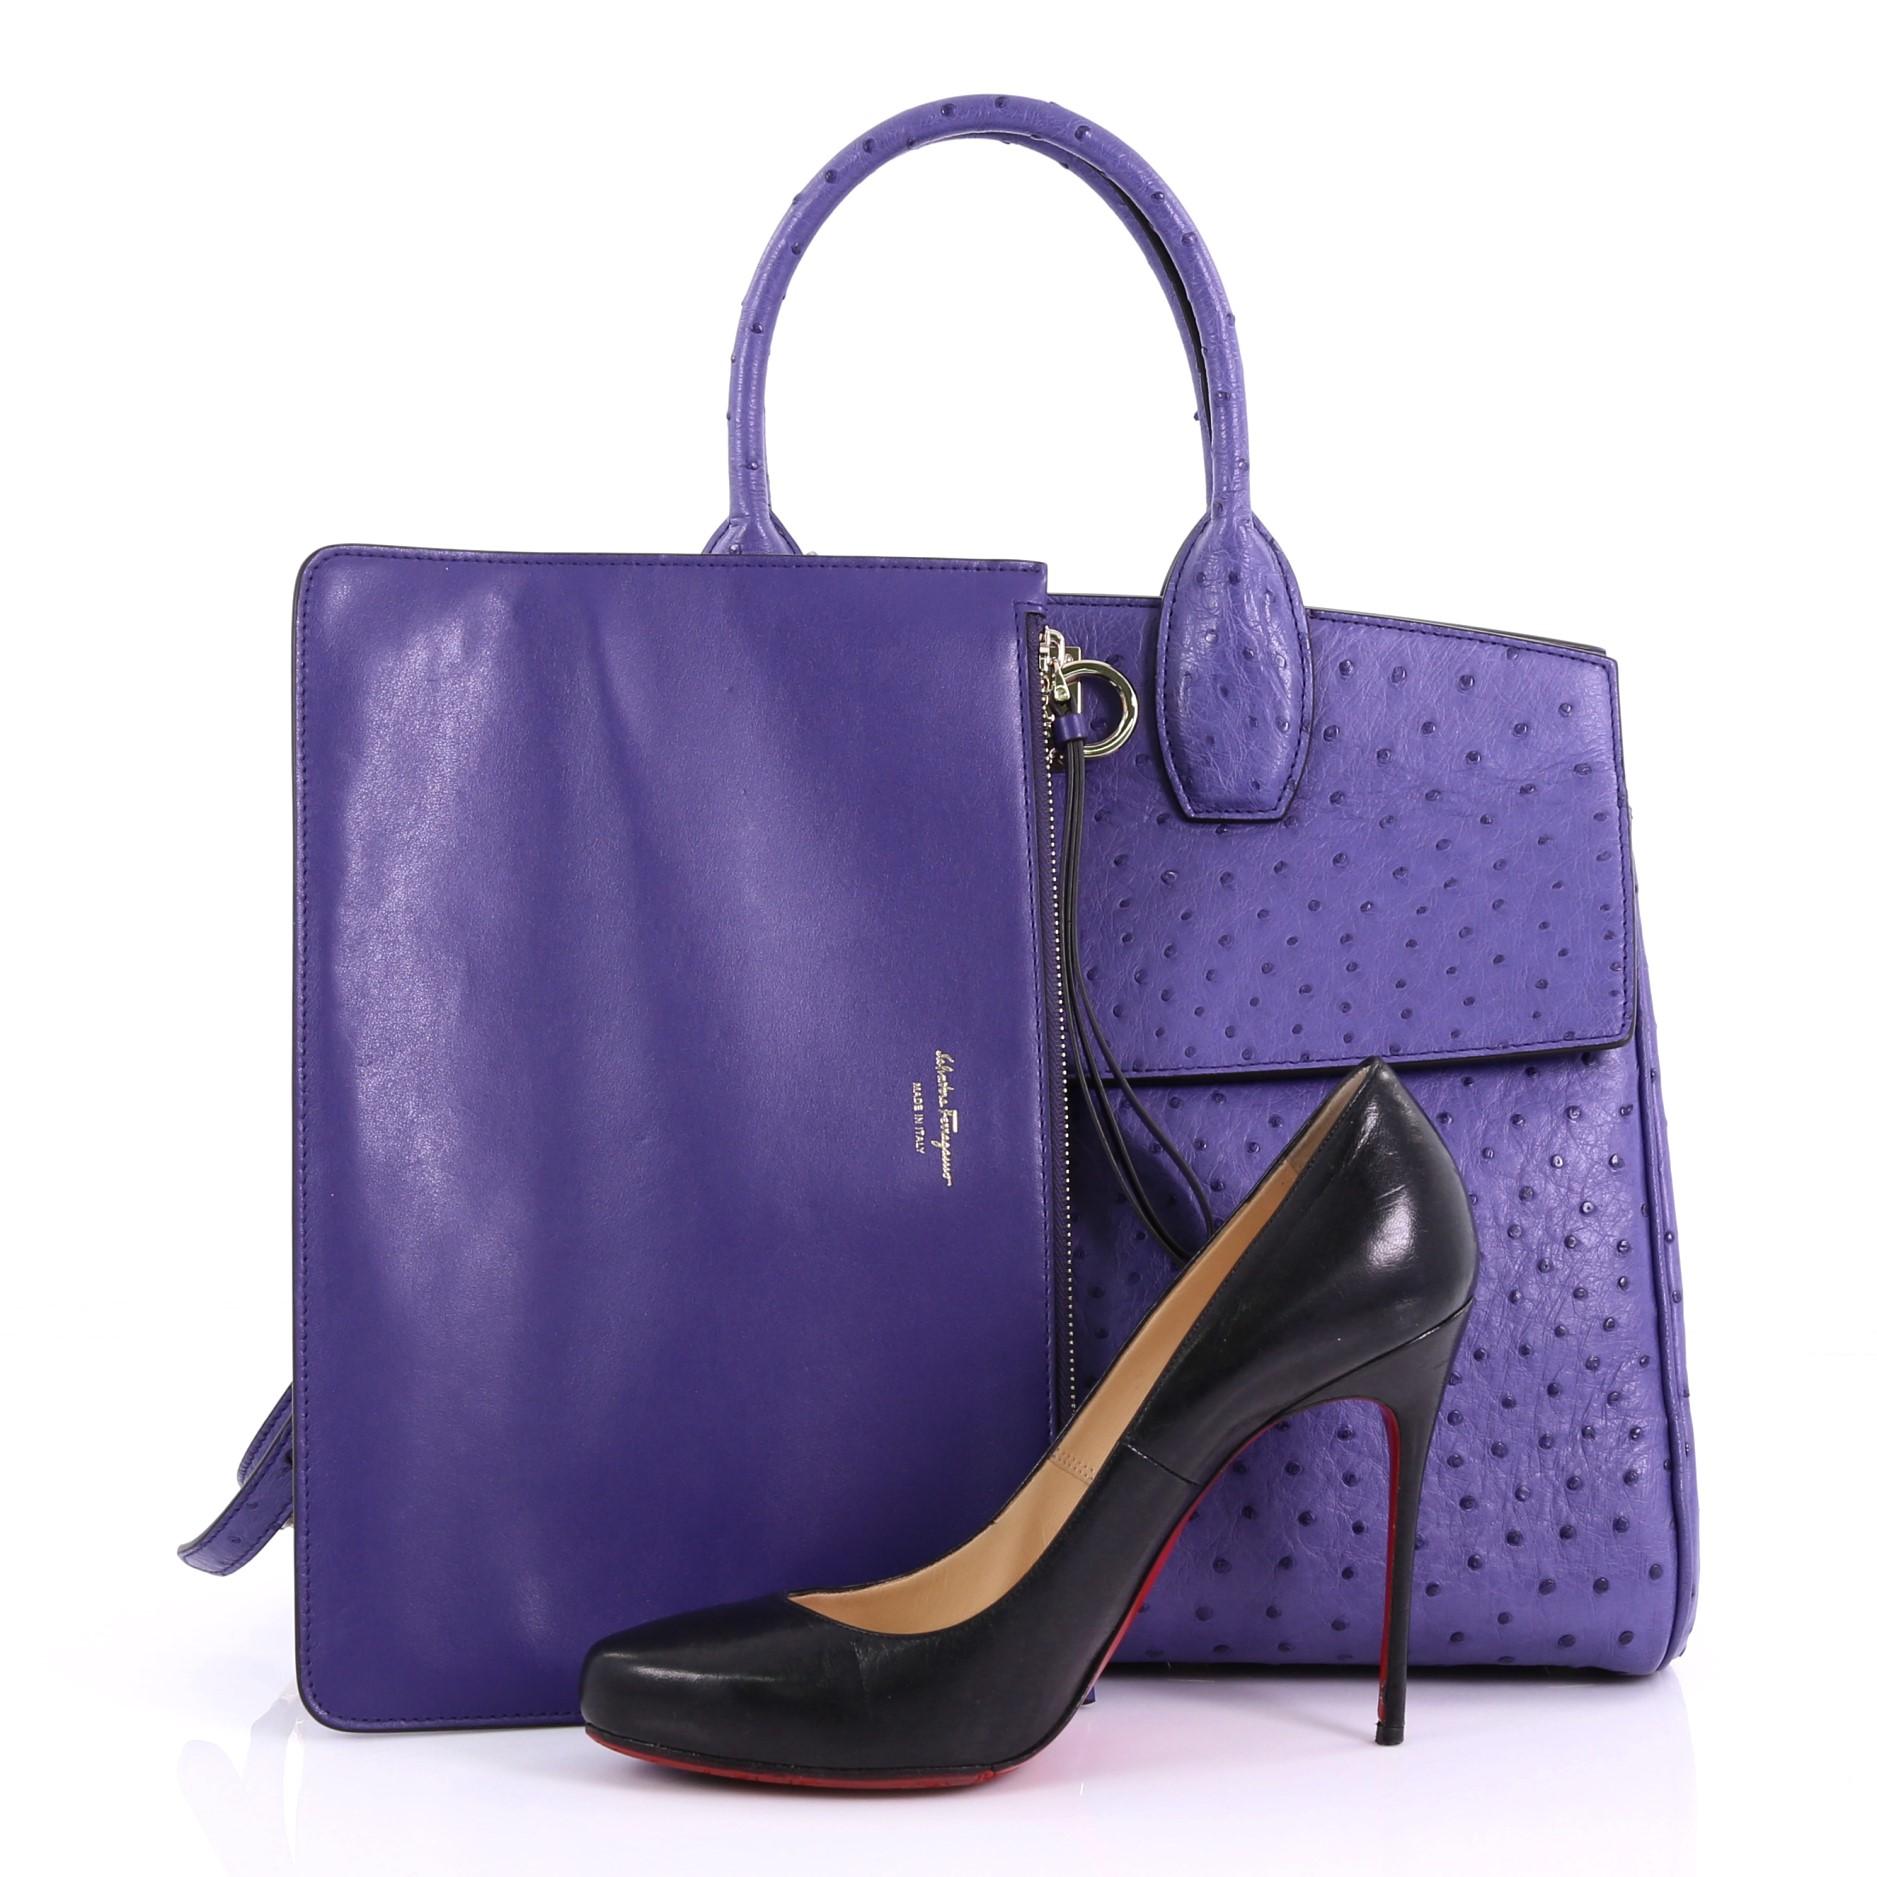 This Salvatore Ferragamo Studio Satchel Ostrich Medium, crafted in genuine purple ostrich, features dual rolled leather handles, Gancini closure, studded base, zip pocket under flap and gold-tone hardware. Its Gancini closure opens to a purple